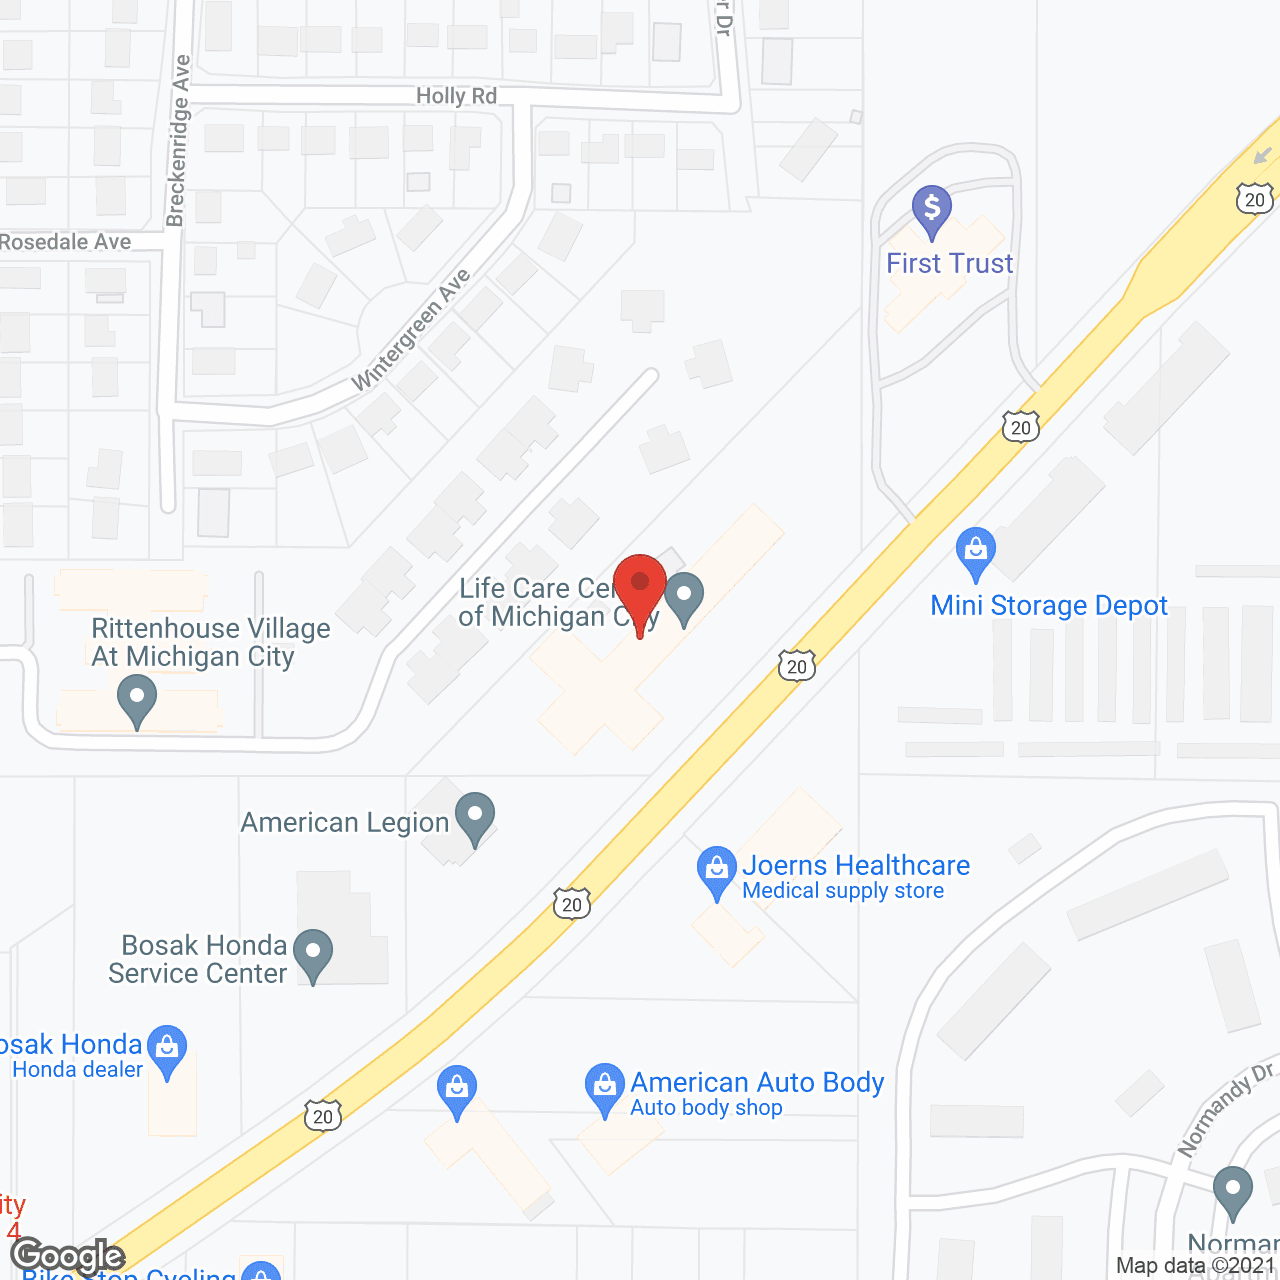 Life Care Ctr of Michigan City in google map